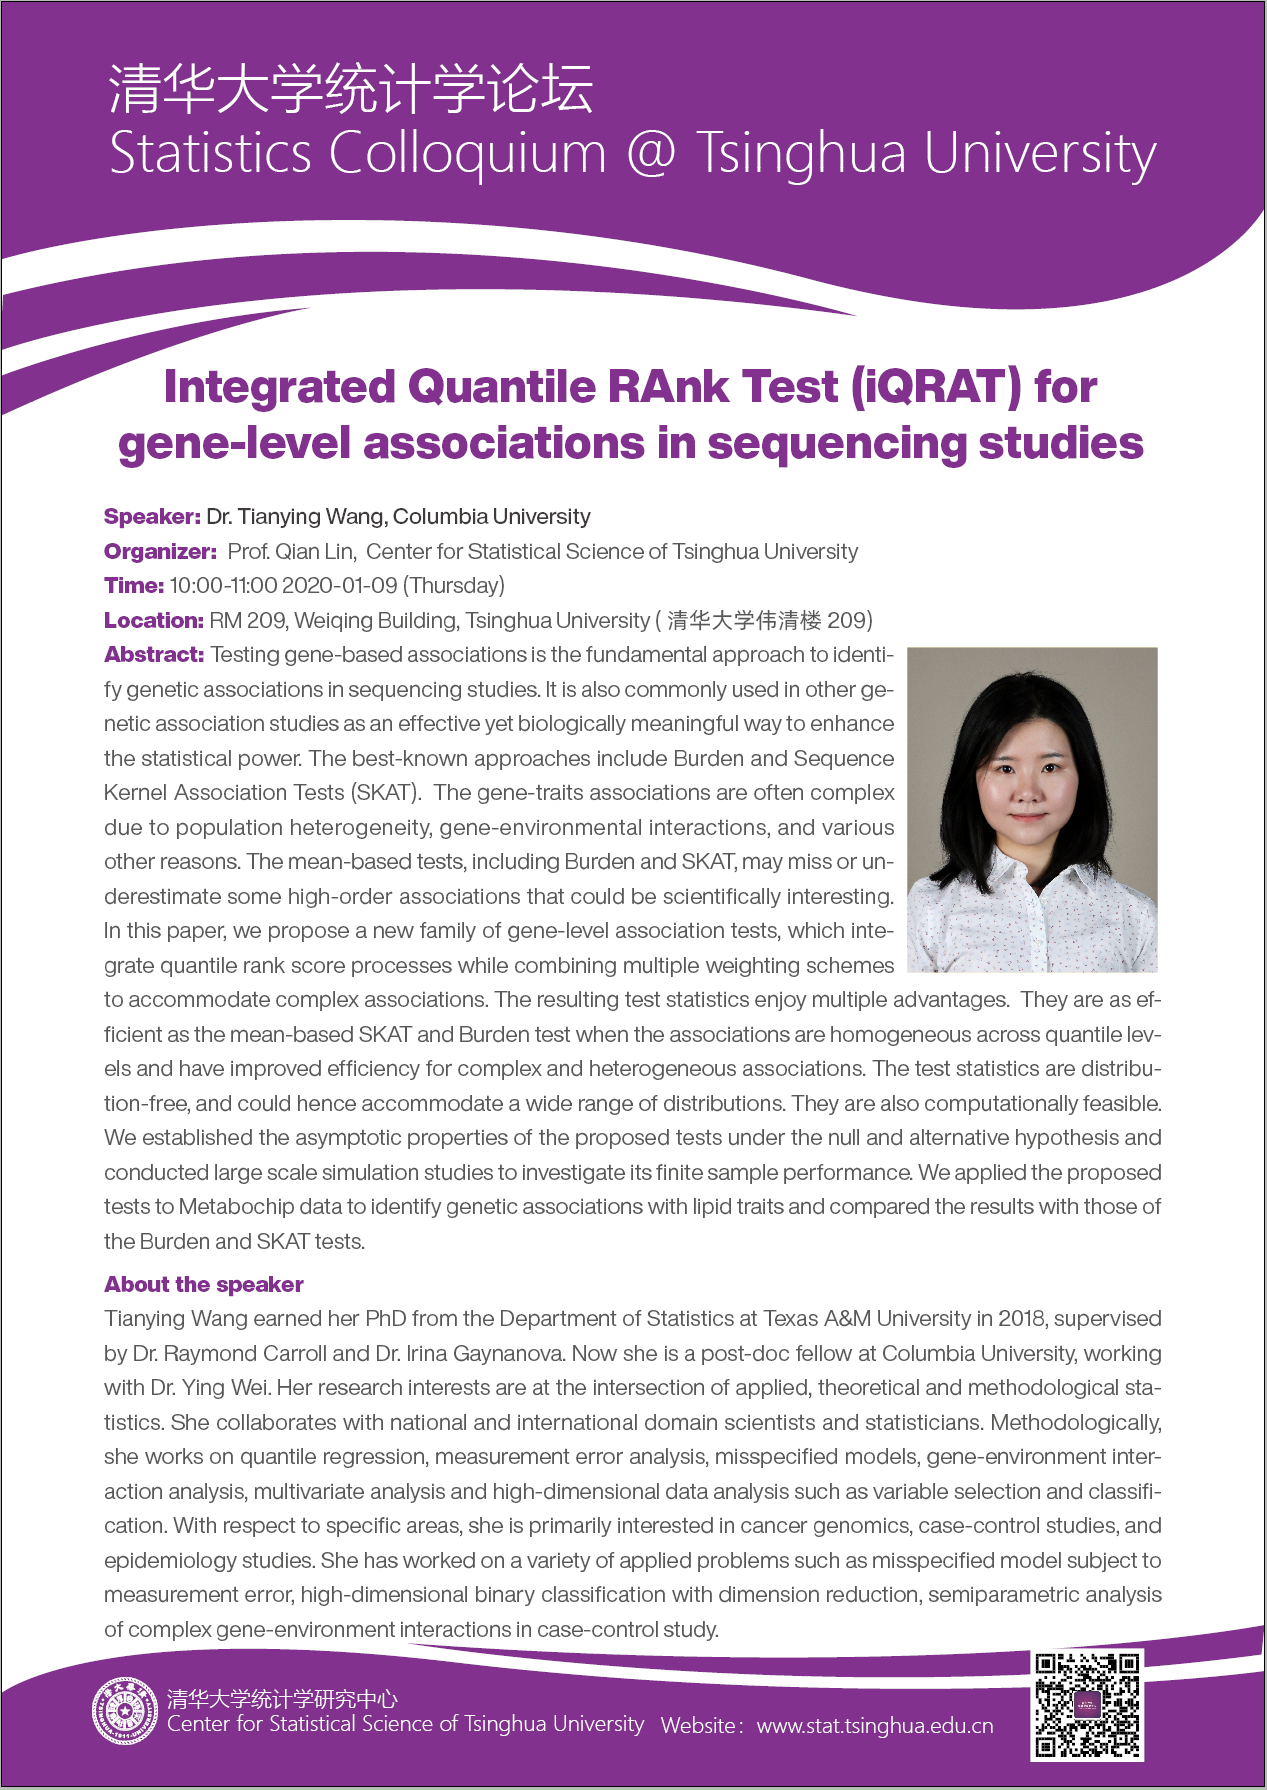 Integrated Quantile RAnk Test (iQRAT) for gene-level associations in sequencing studies